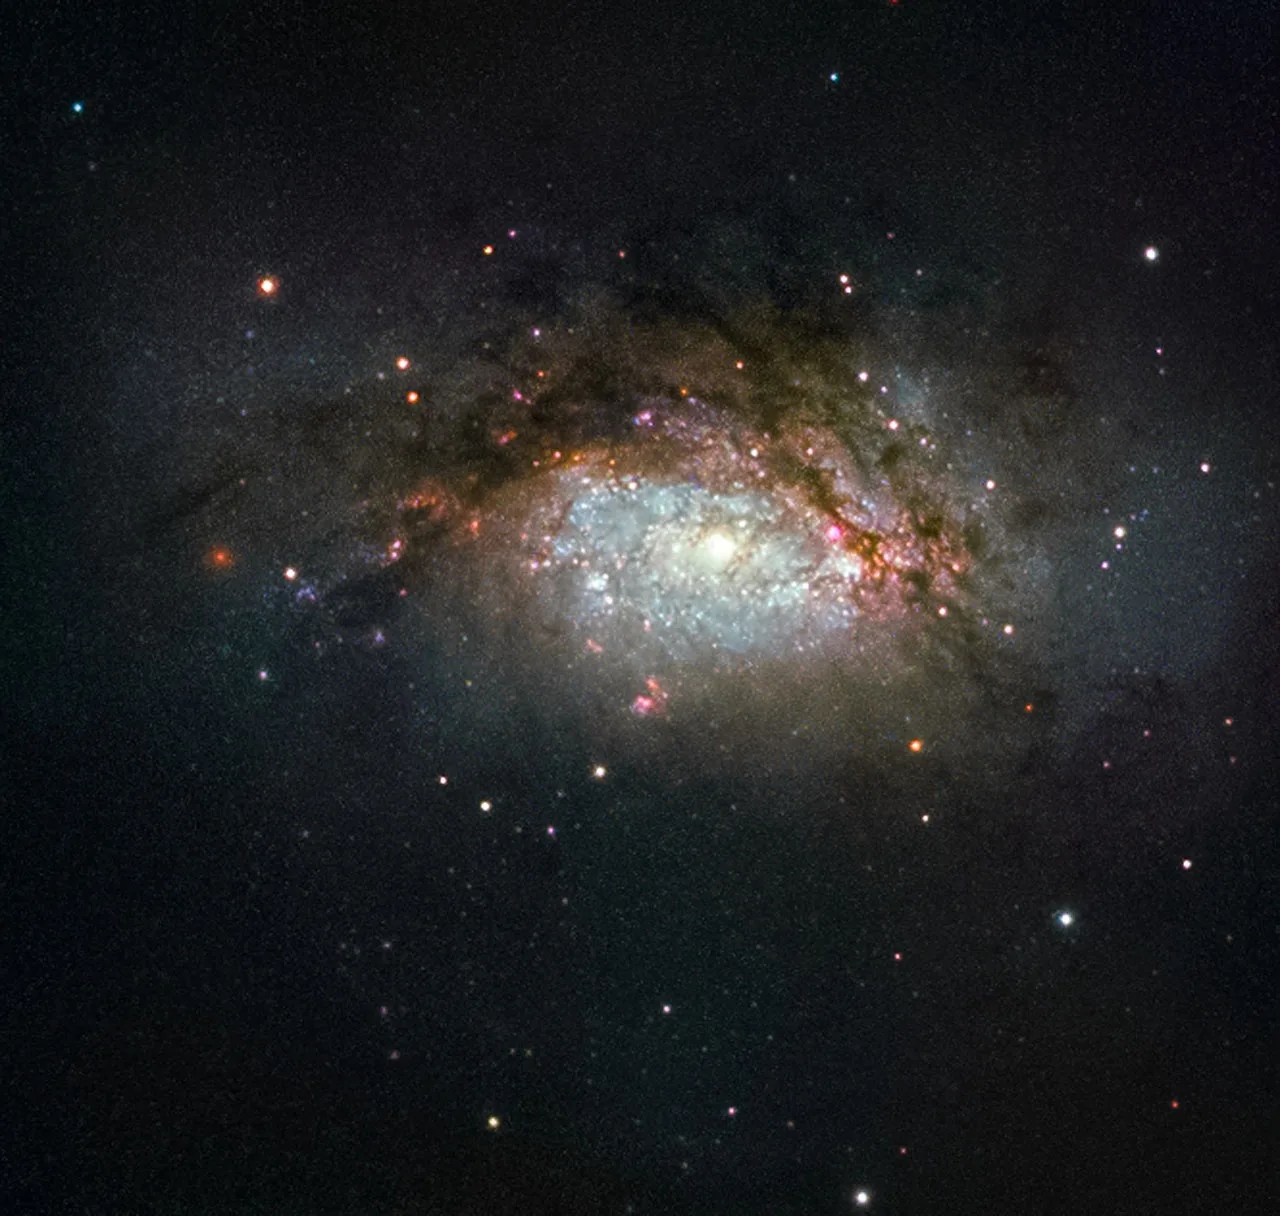 A collision between two good-sized galaxies, slowly evolving to become a giant elliptical galaxy, leaving a glowing center of blue stars, surrounded by pink and red stars and brownish-orange cloud-arms of gas and dust.